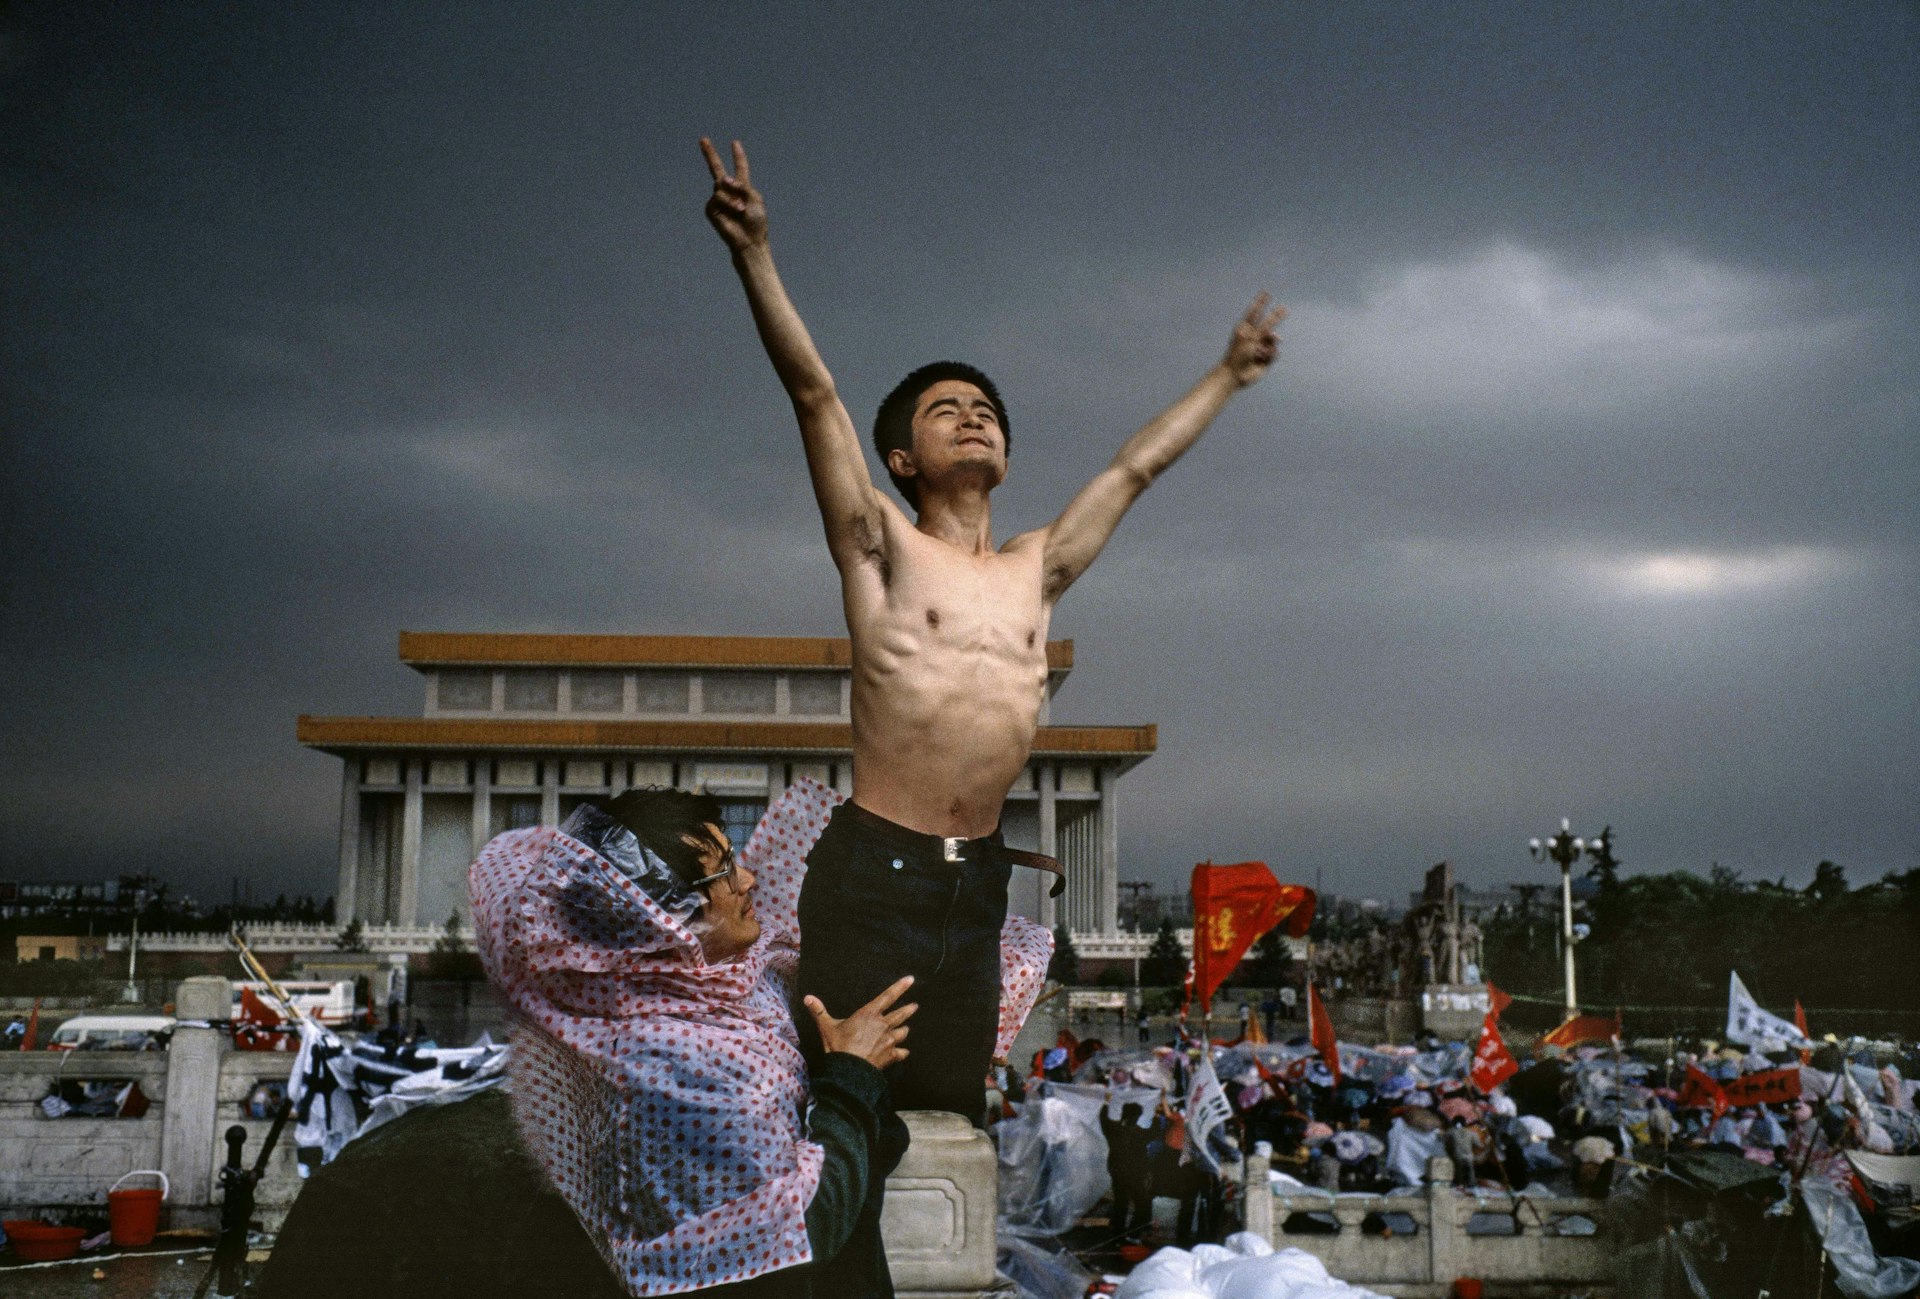 Tiananmen Square. Beijing, China. 1989 © Stuart Franklin / Magnum Photos "'Man is free, but men aren't. There are no limits to the freedom of one, there